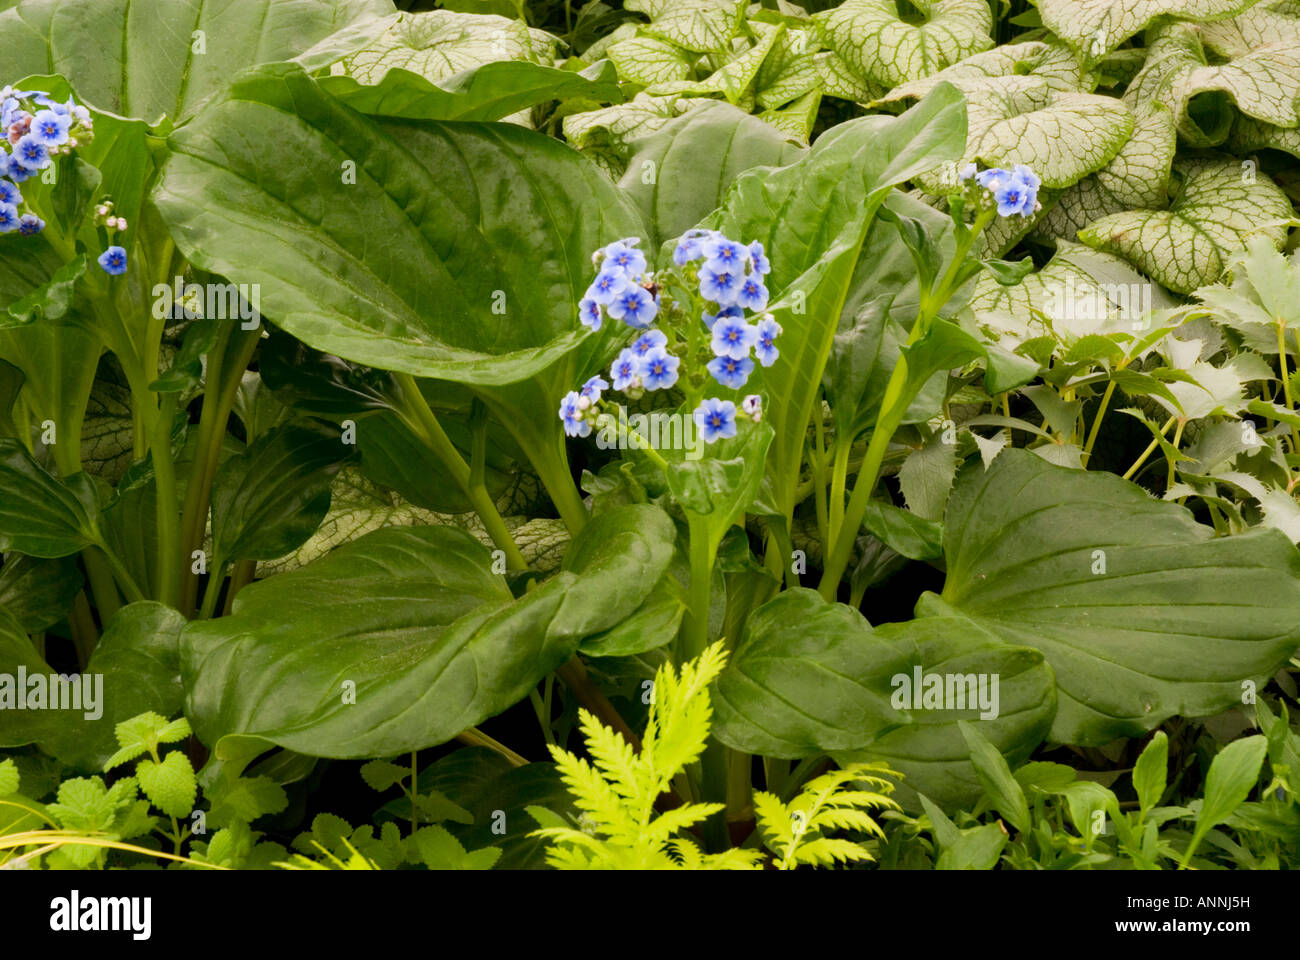 Blue flowers of Myosotidium hortensia (Chatham Islands forget-me-not) growing with veined leaves Stock Photo